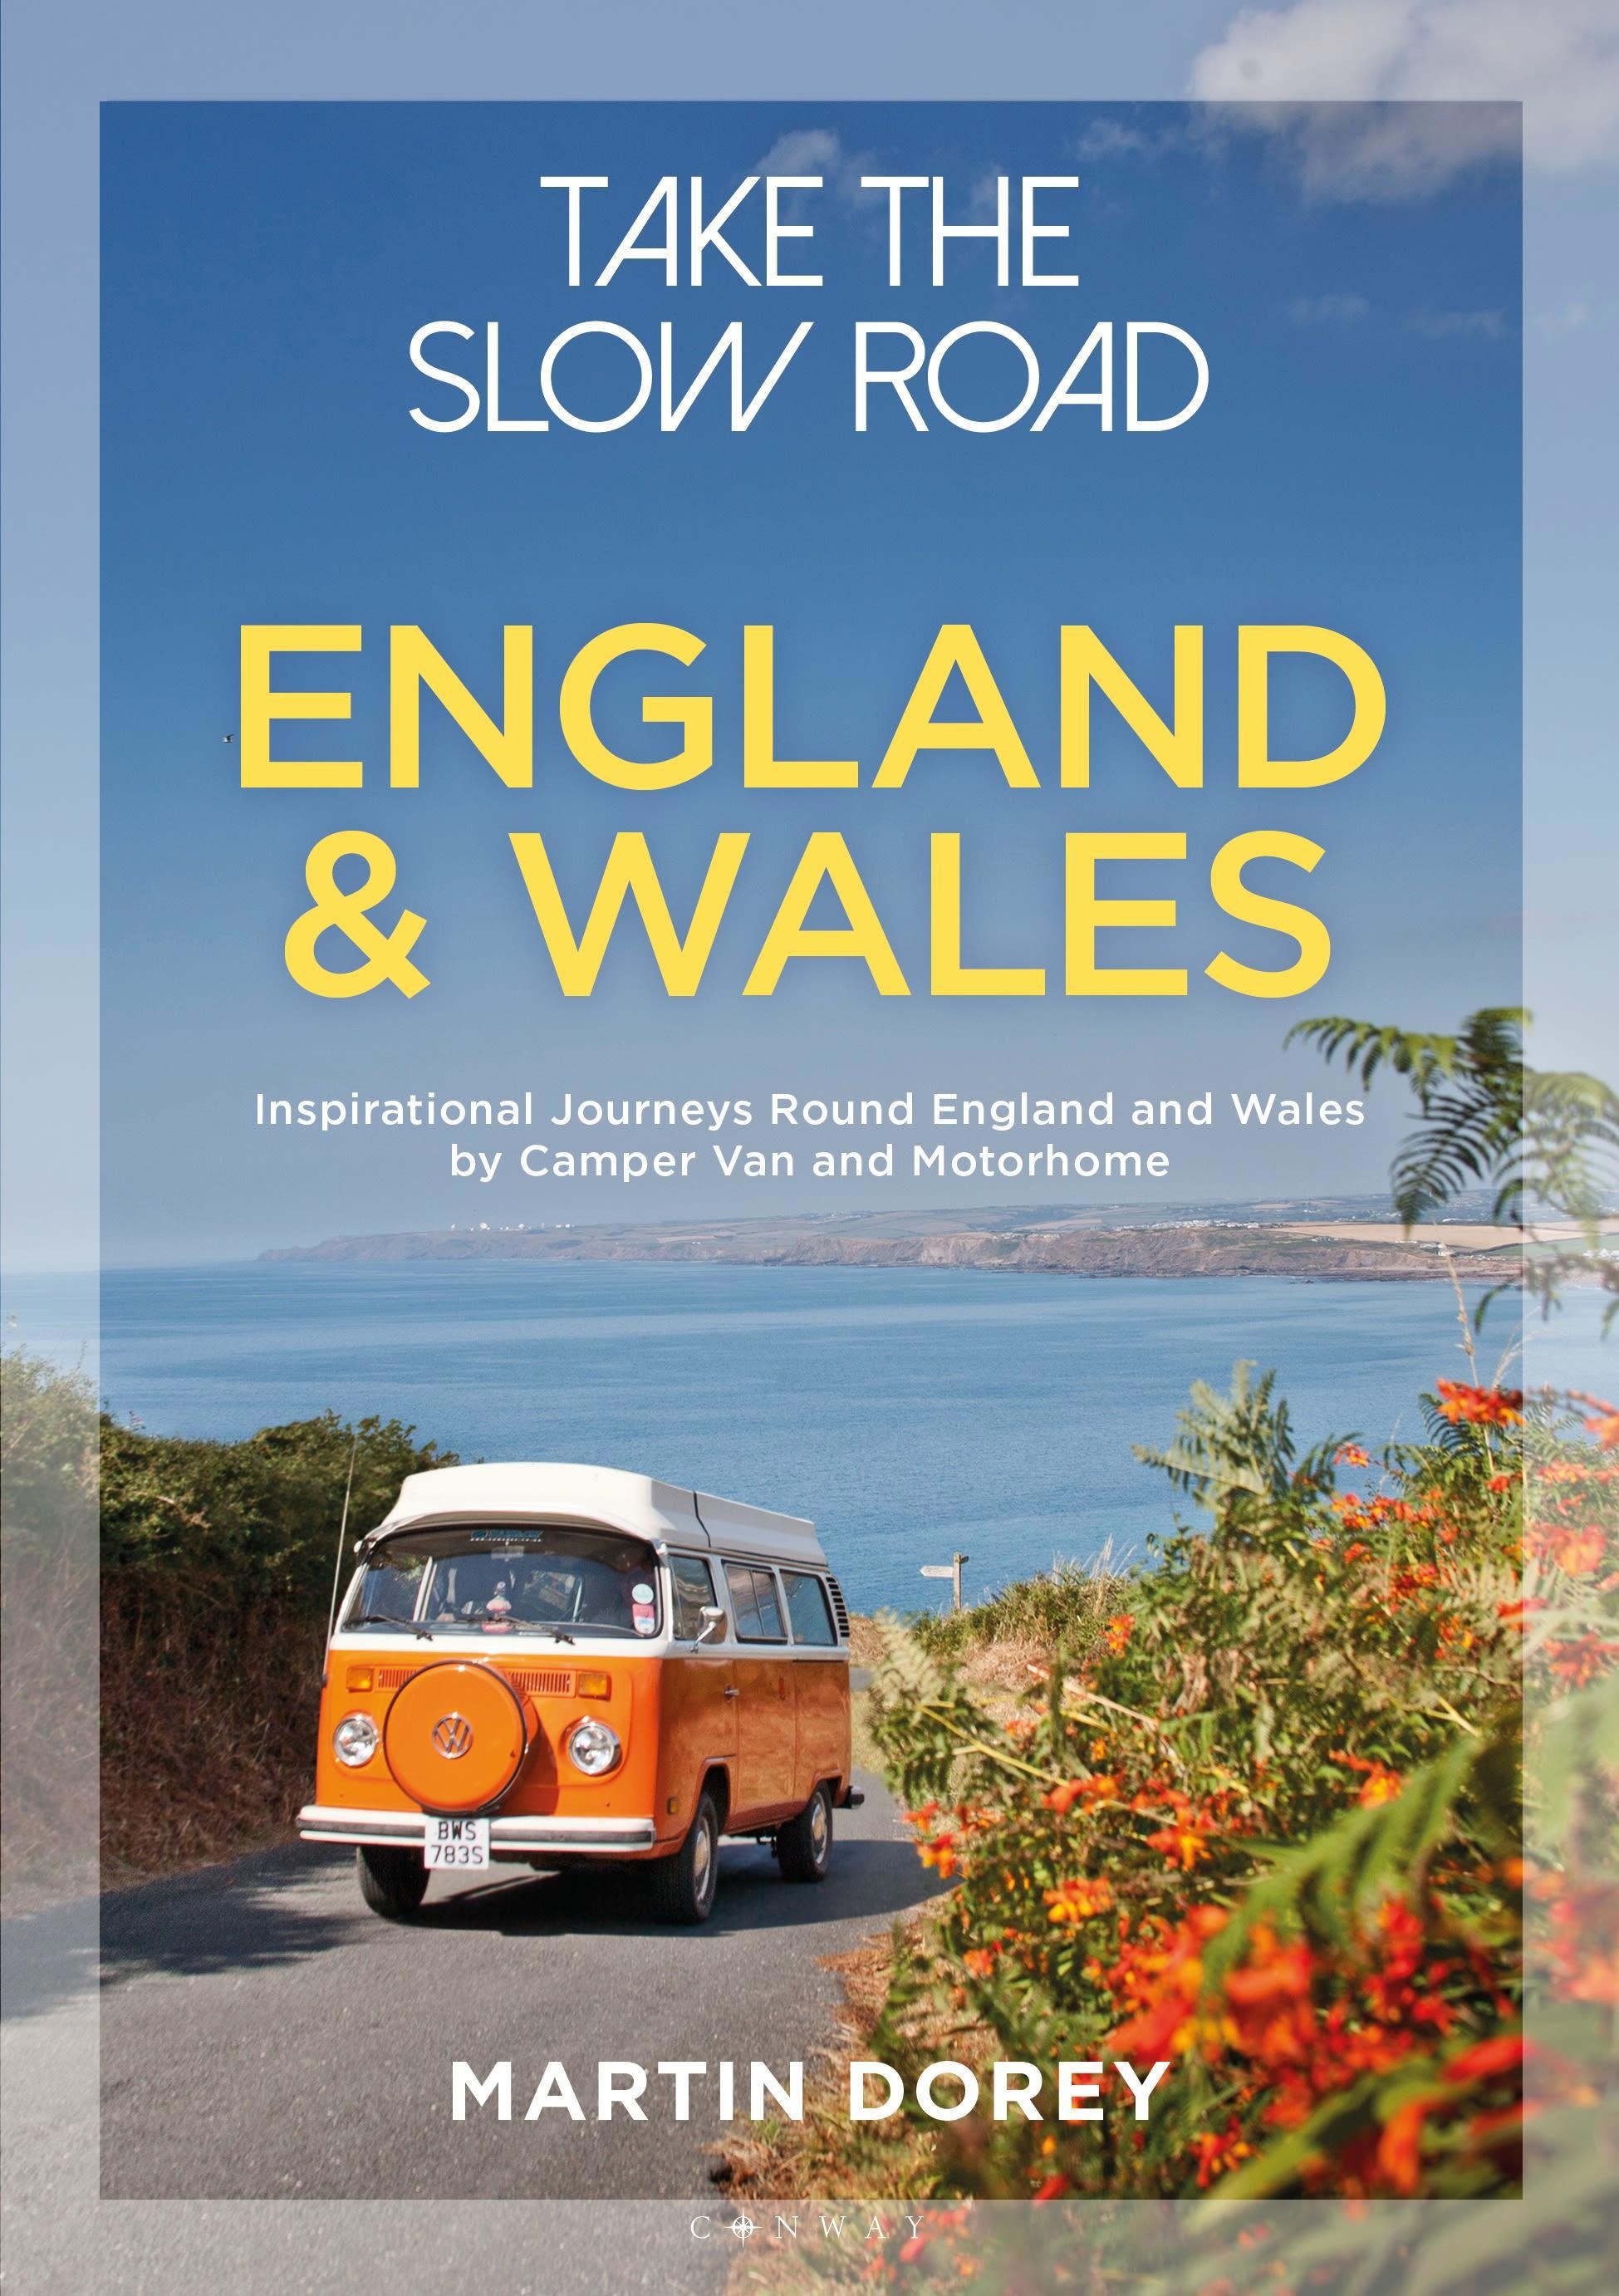 Take the Slow Road: England and Wales: Inspirational Journeys Round England and Wales by Camper Van, Ratgeber von Martin Dorey